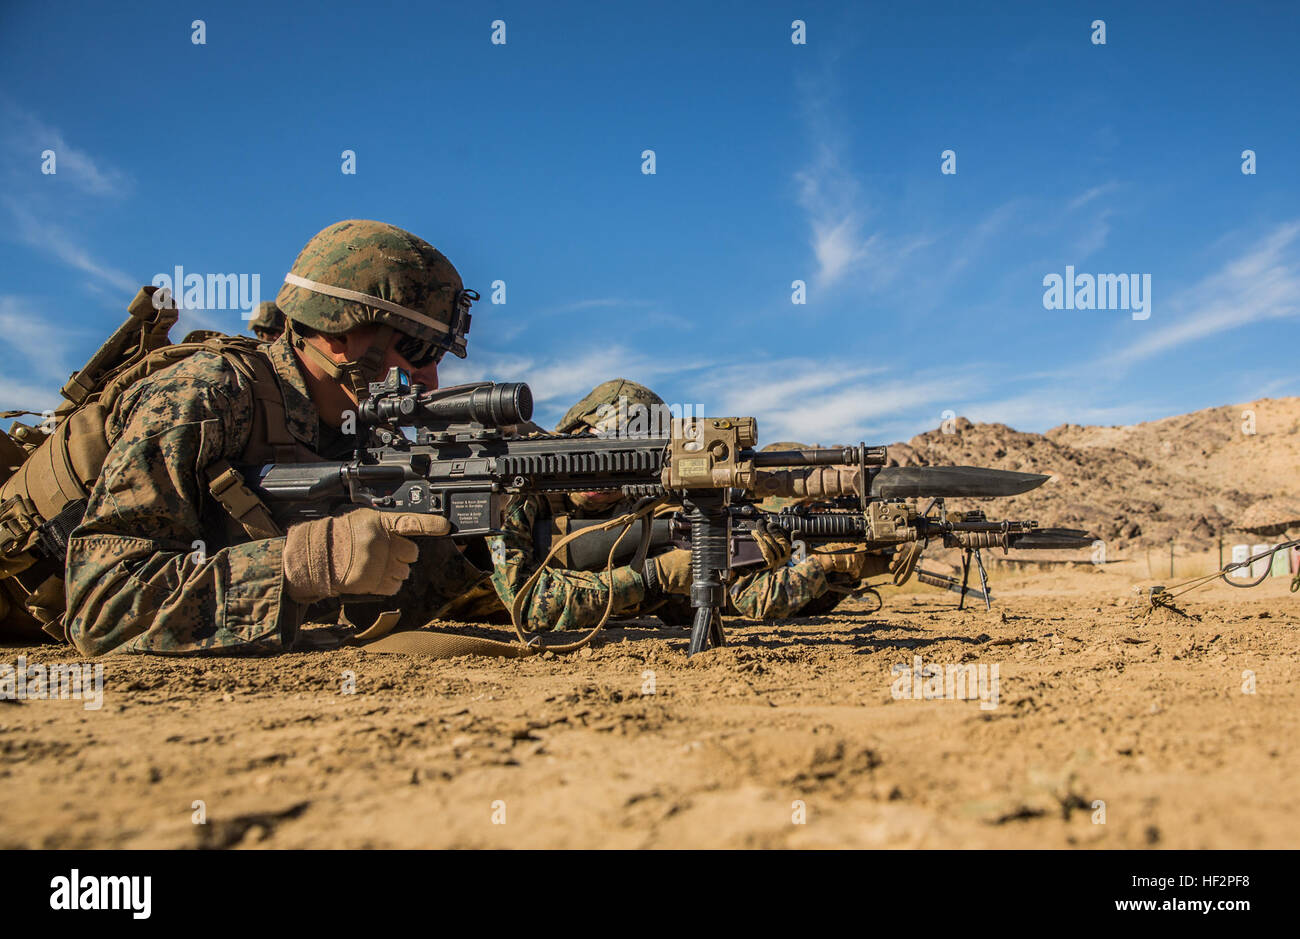 U.S. Marines with Battalion Landing Team 3rd Battalion, 1st Marine Regiment, 15th Marine Expeditionary Unit, conduct marksmanship drills during a combined arms exercise aboard Marine Corps Air Ground Combat Center, Twentynine Palms, Calif., Dec. 10, 2014. BLT 3/1 conducted this training concurrent with the 15th MEU’s realistic urban training.  RUT prepares the 15th MEU’s Marines for their upcoming deployment, enhancing their combat skills in environments similar to those they may find in future missions. (U.S. Marine Corps Photo by Sgt. Emmanuel Ramos/Released) 15th MEU Marines train in combin Stock Photo